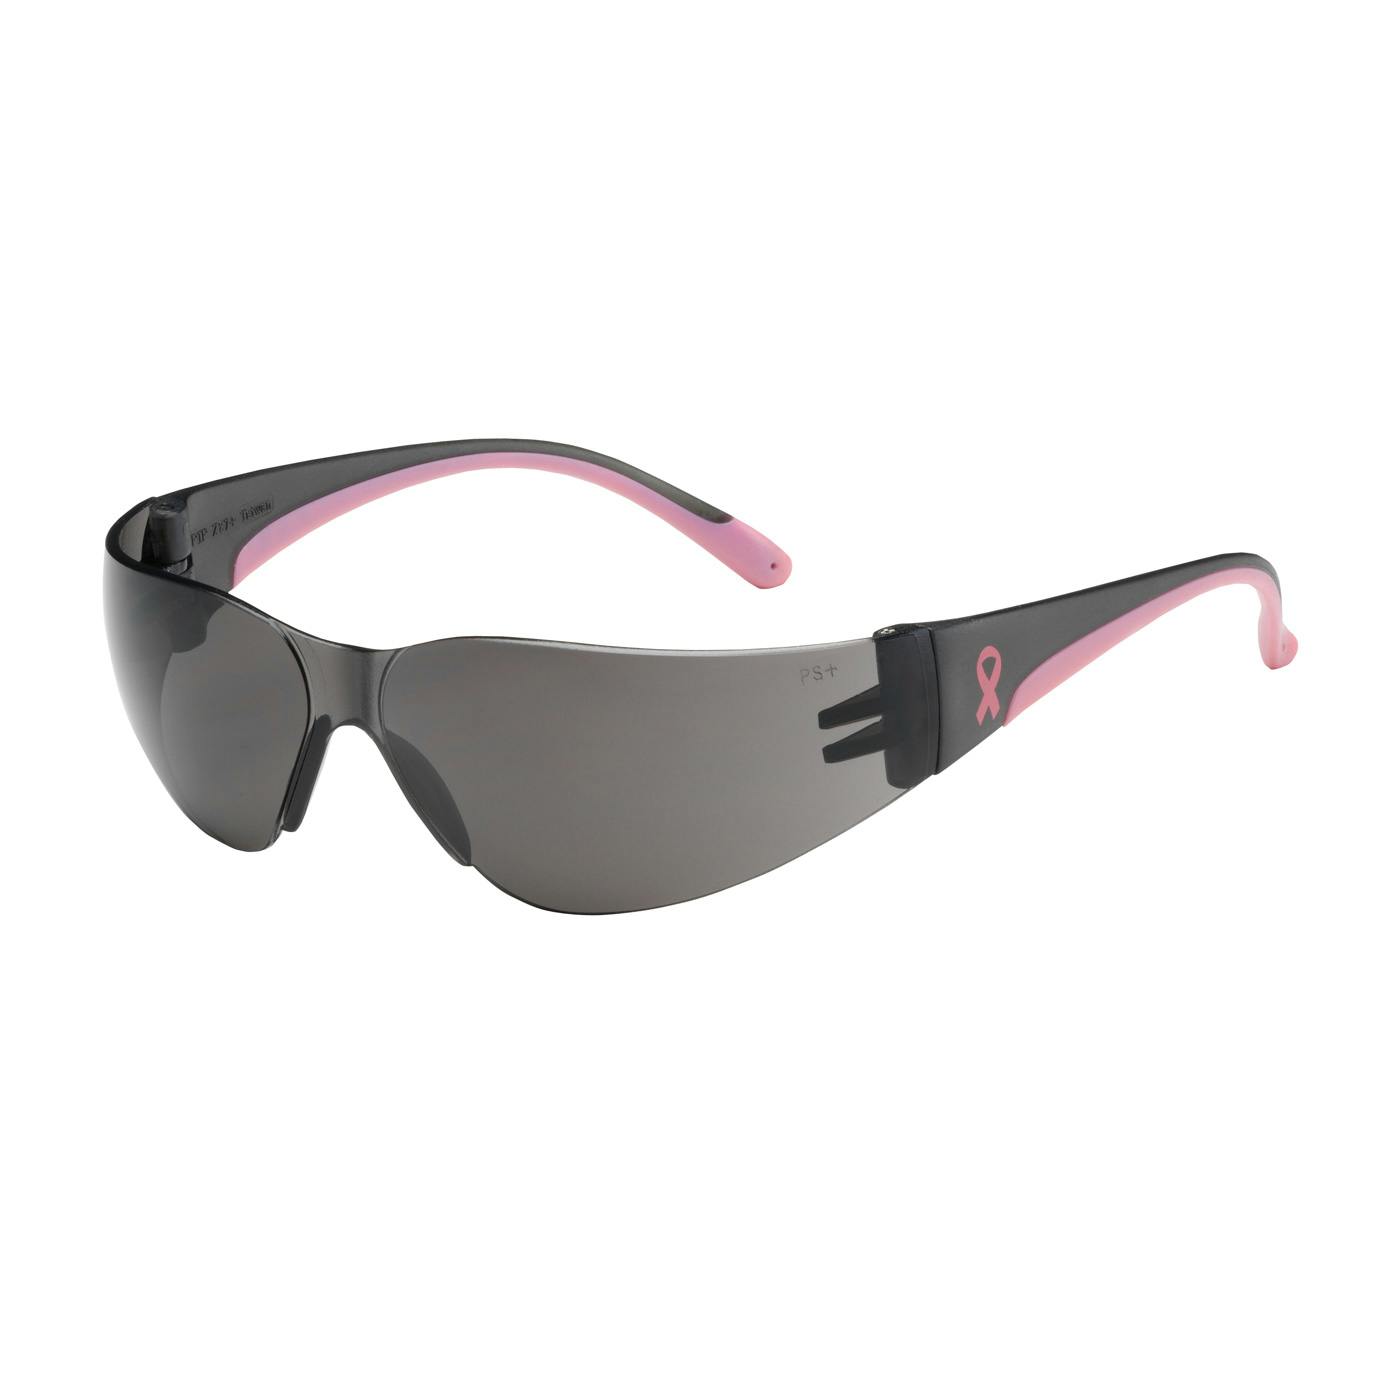 Rimless Safety Glasses with Gray / Pink Temple, Gray Lens and Anti-Scratch Coating, Pink (250-11-5501) - OS_0